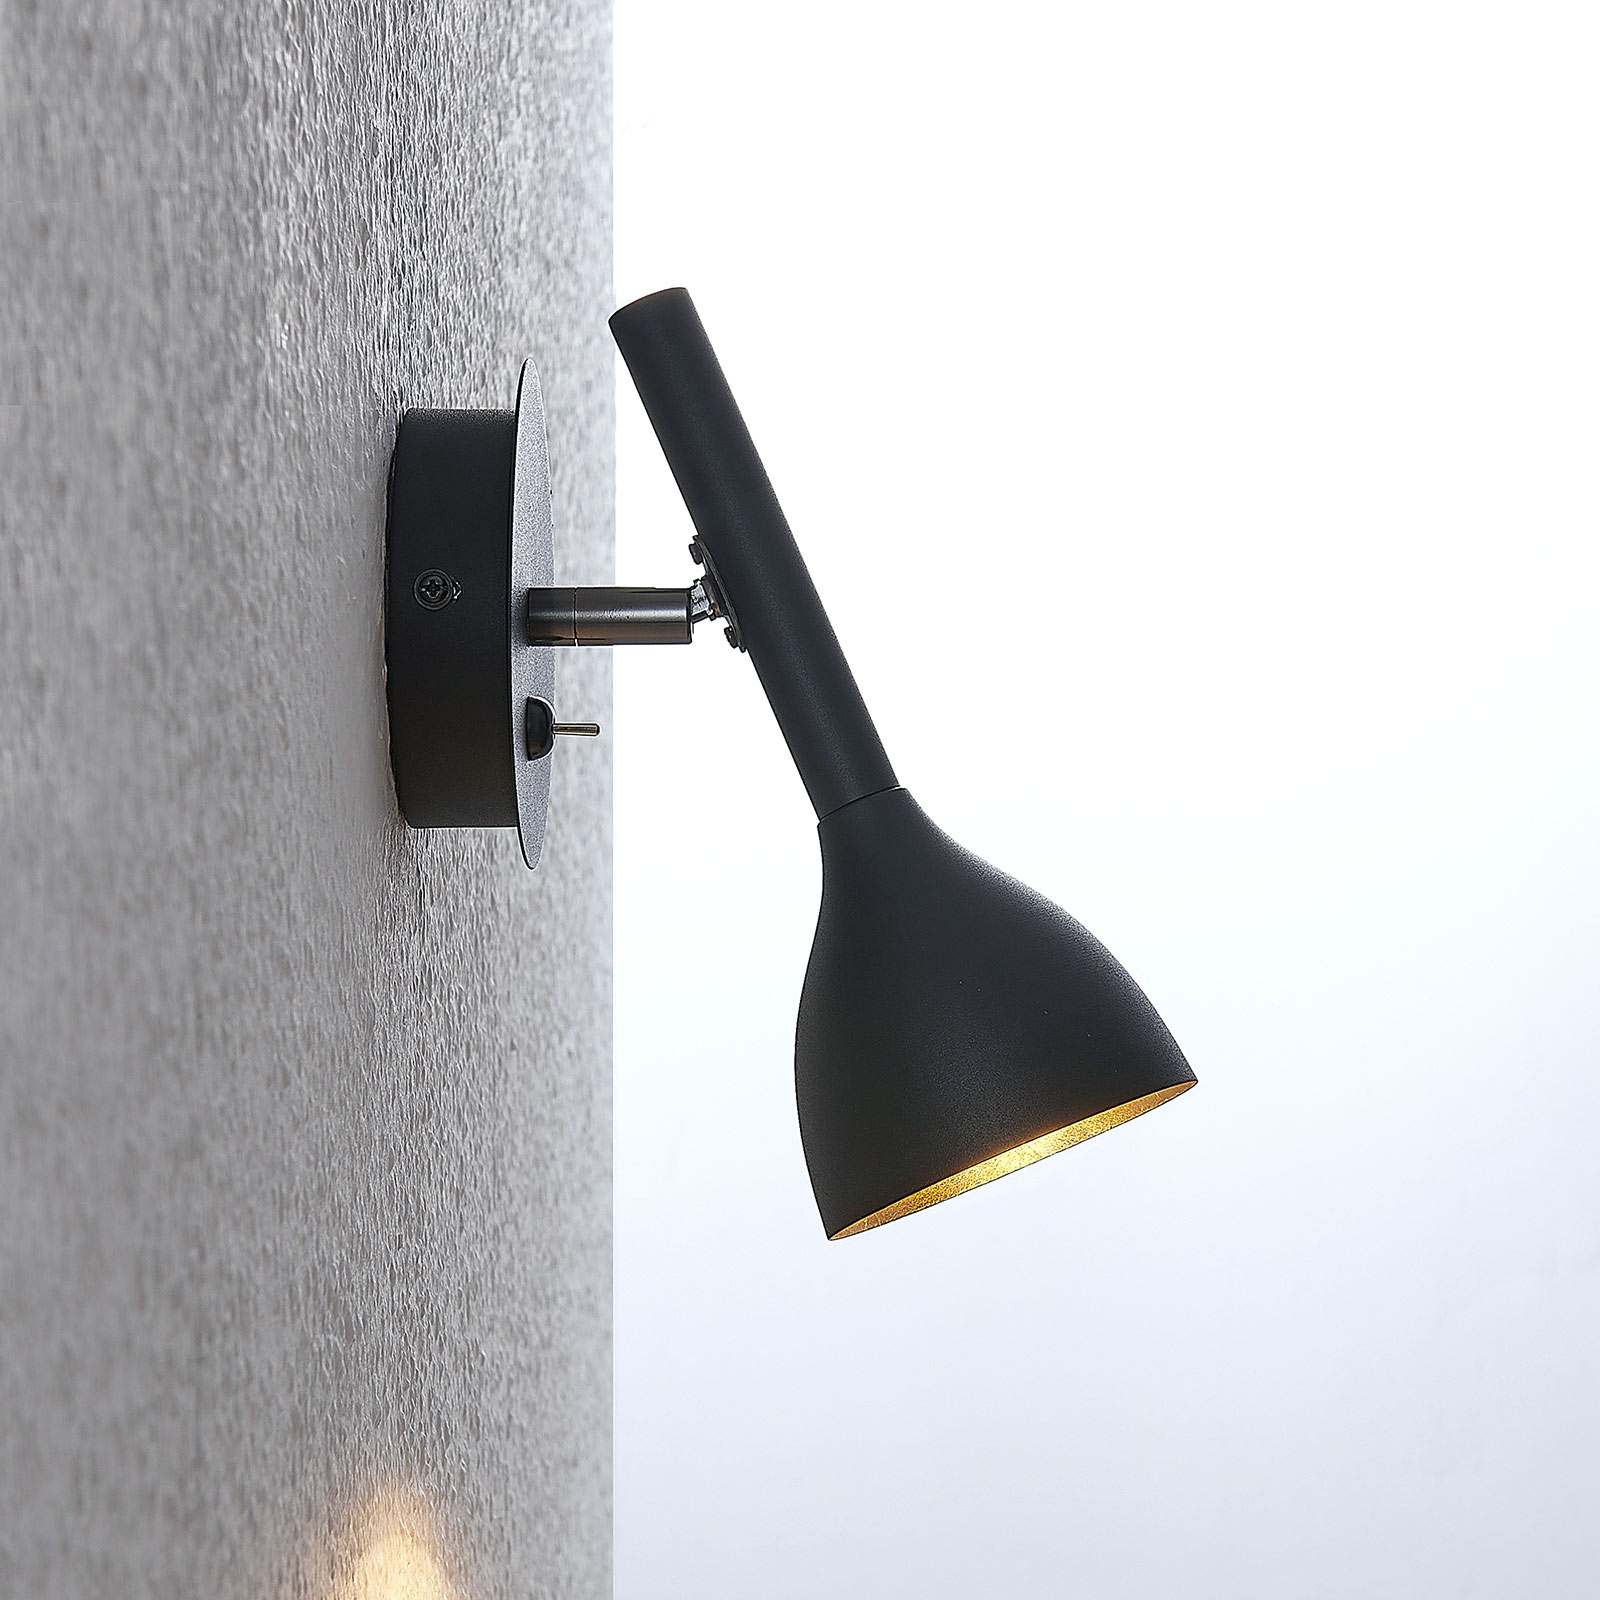 Nordwin wall light, metal, black and gold